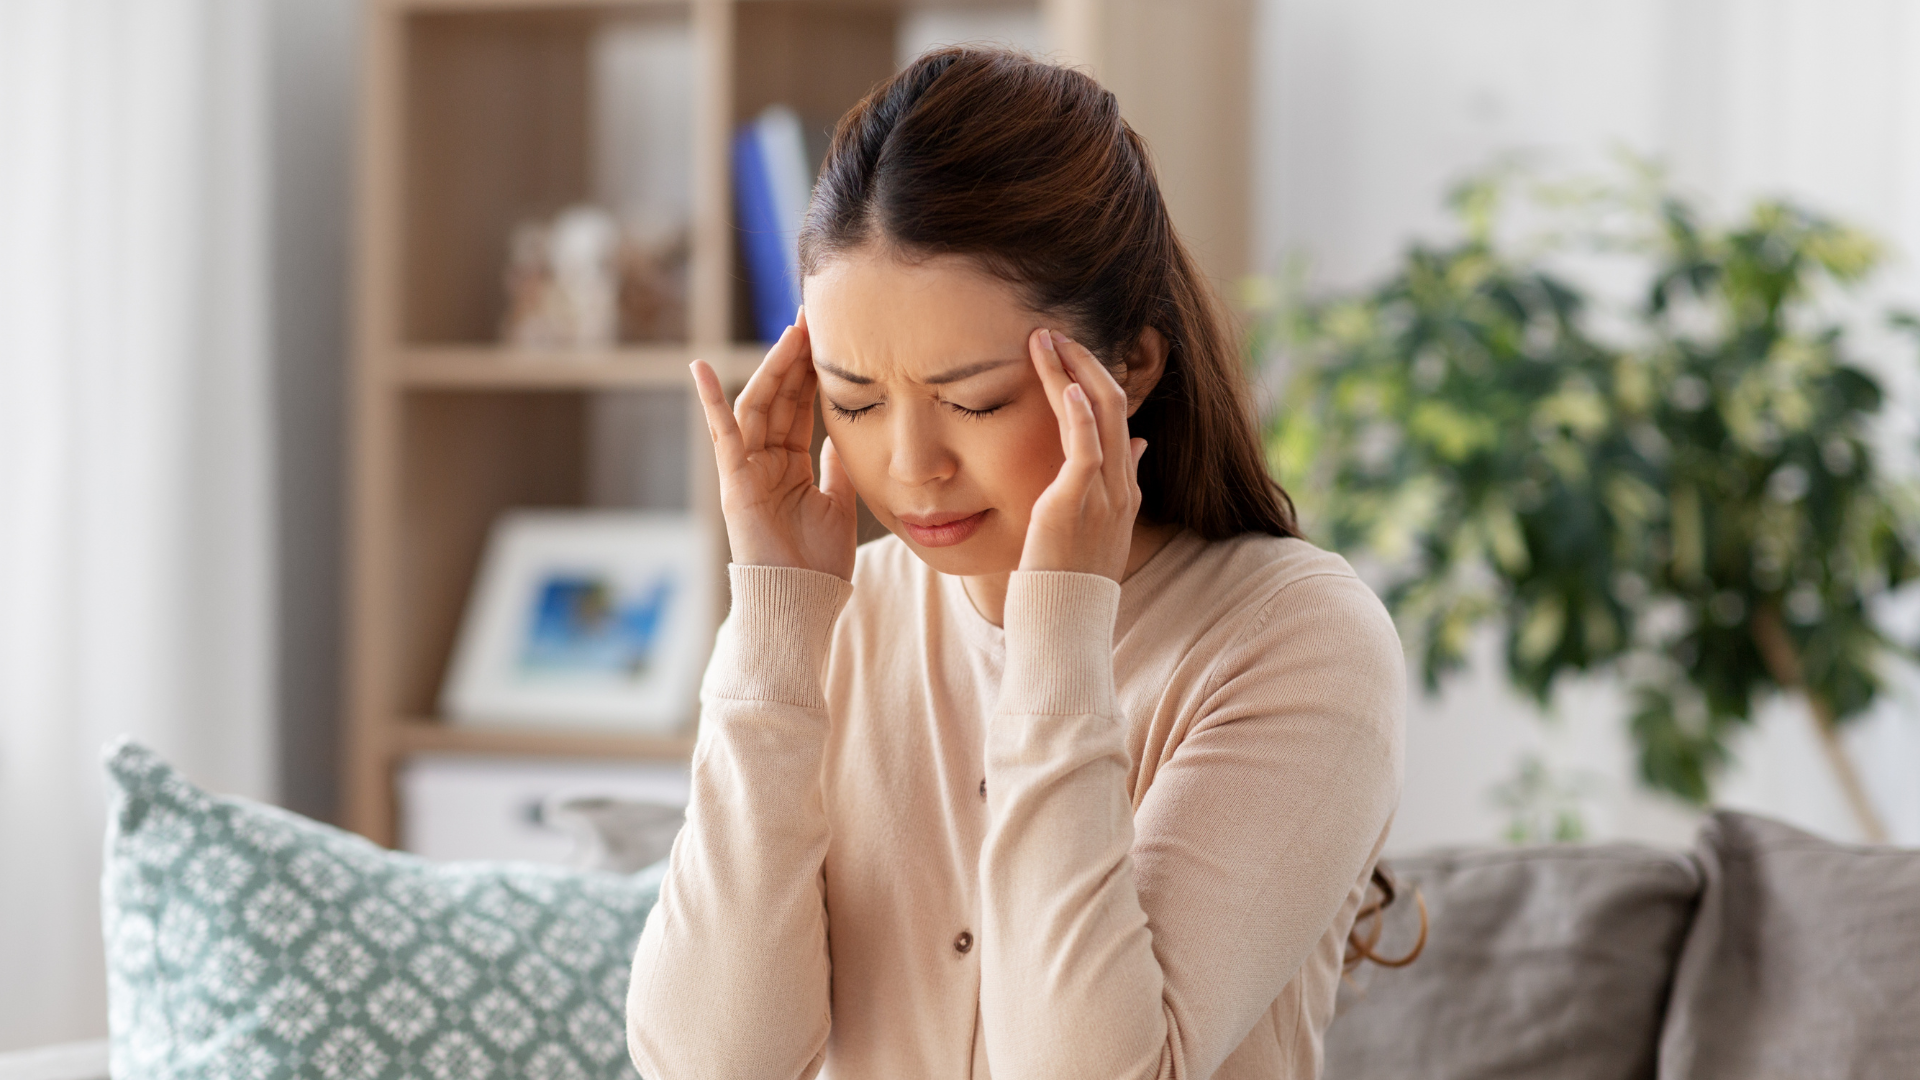 How to deal with migraines?